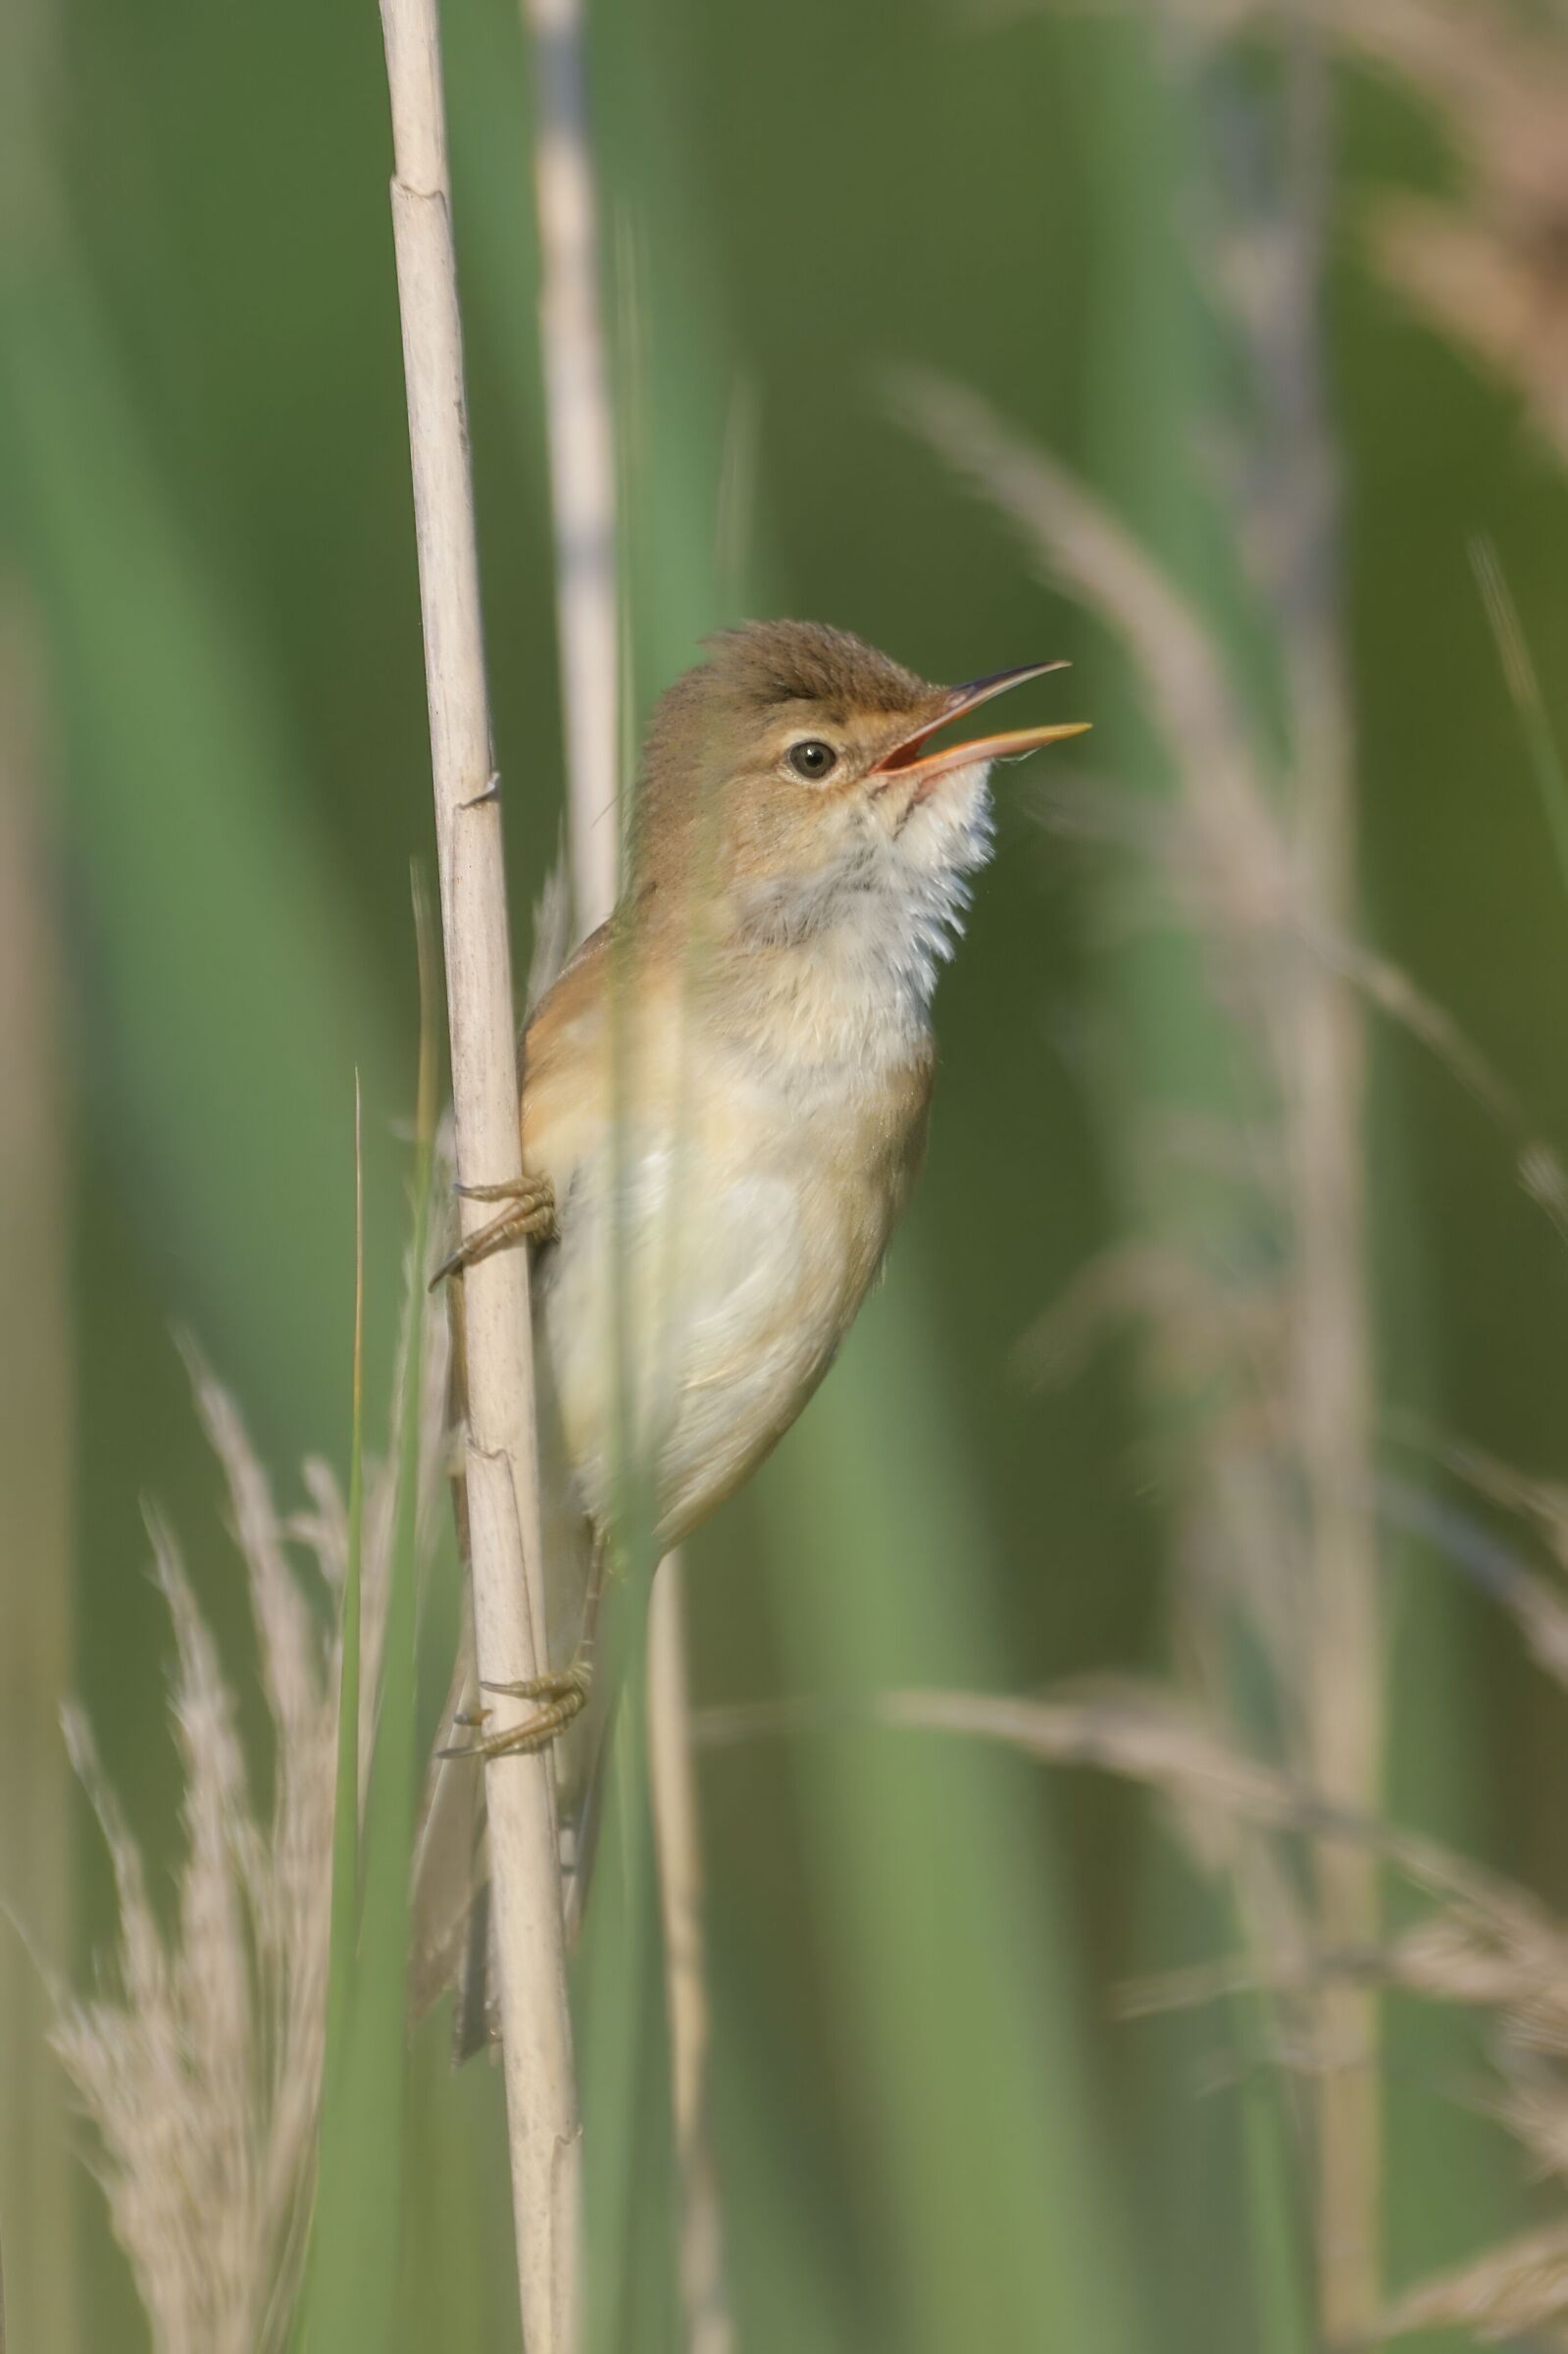 The song of the reed warbler...